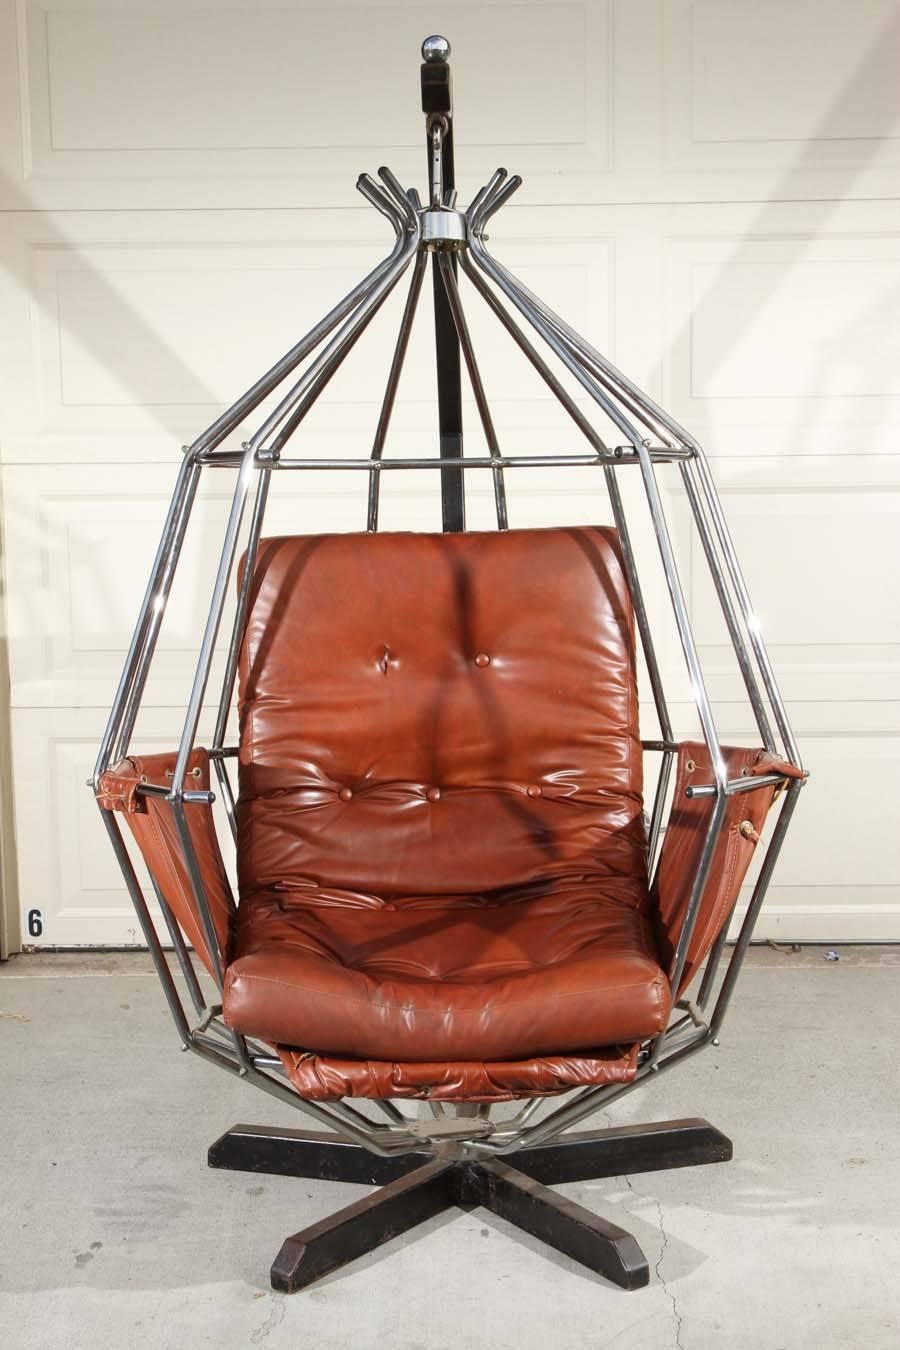 Designed by Swedish designer Ib Arberg, this iconic hanging birdcage, also known as a parrot chair was designed in 1970. The angular stand holds the steel hanging parrot chair, that holds a long cognac leather cushion, held in by a cognac leather